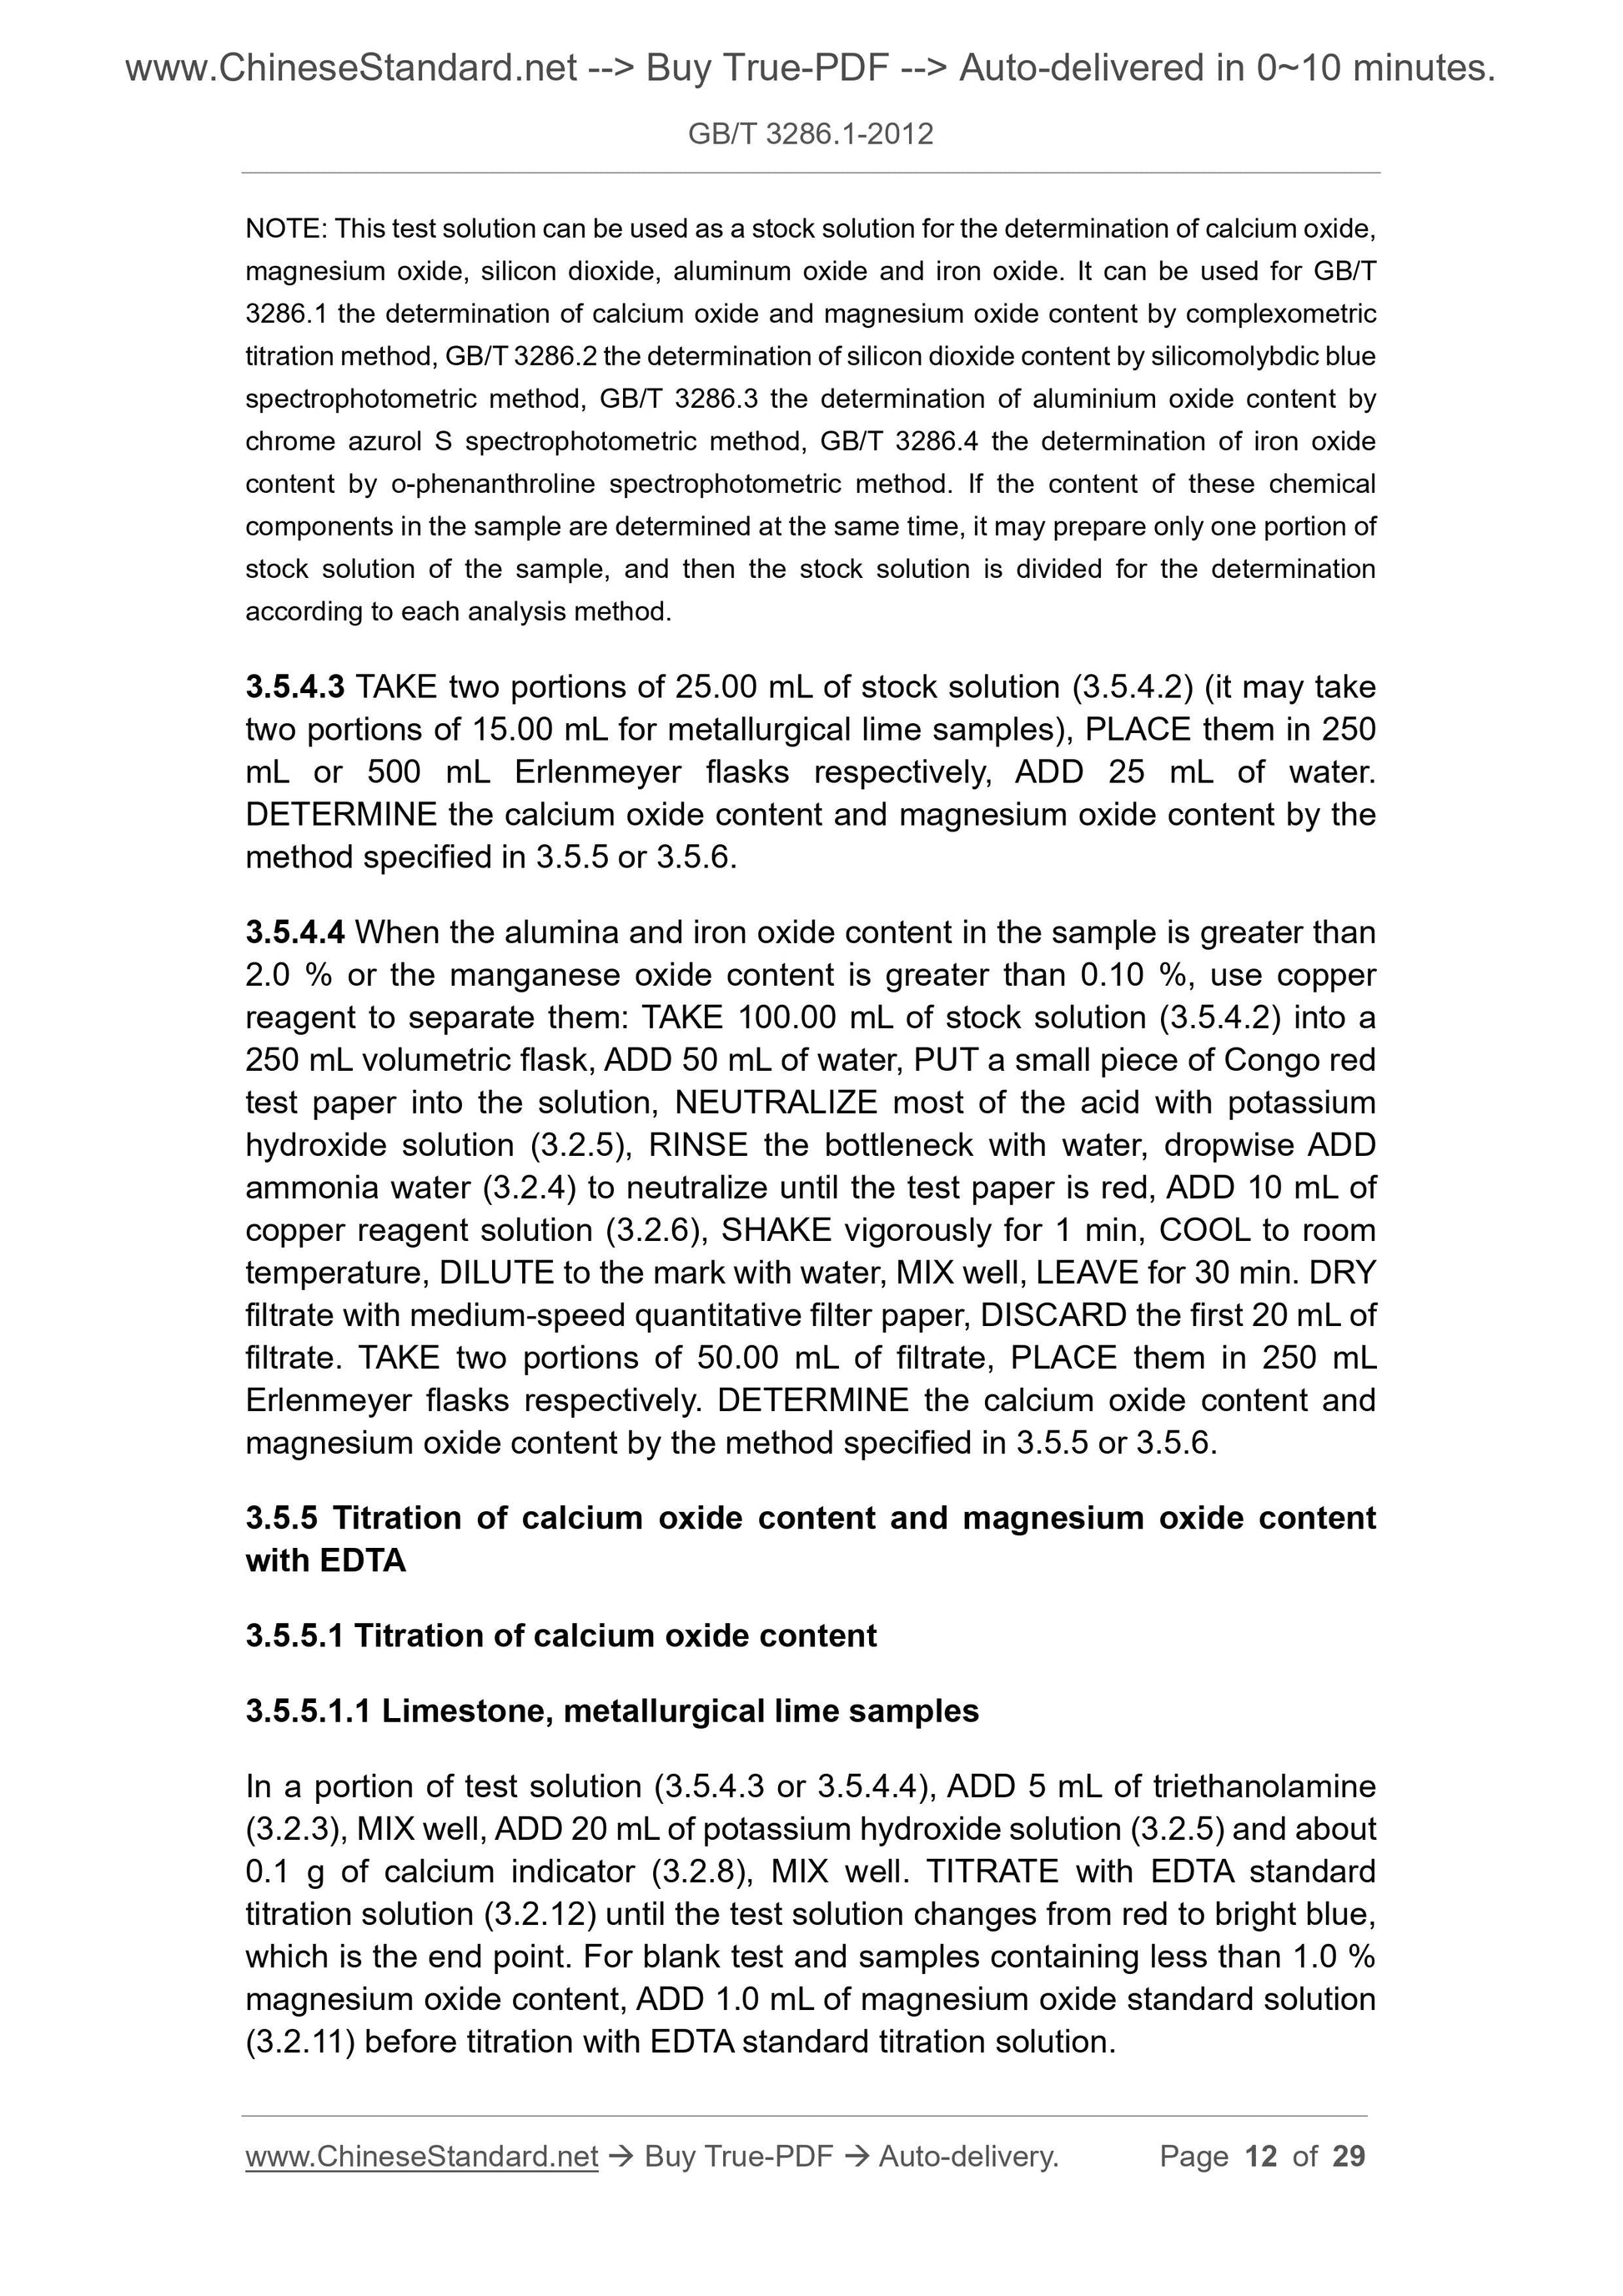 GB/T 3286.1-2012 Page 6